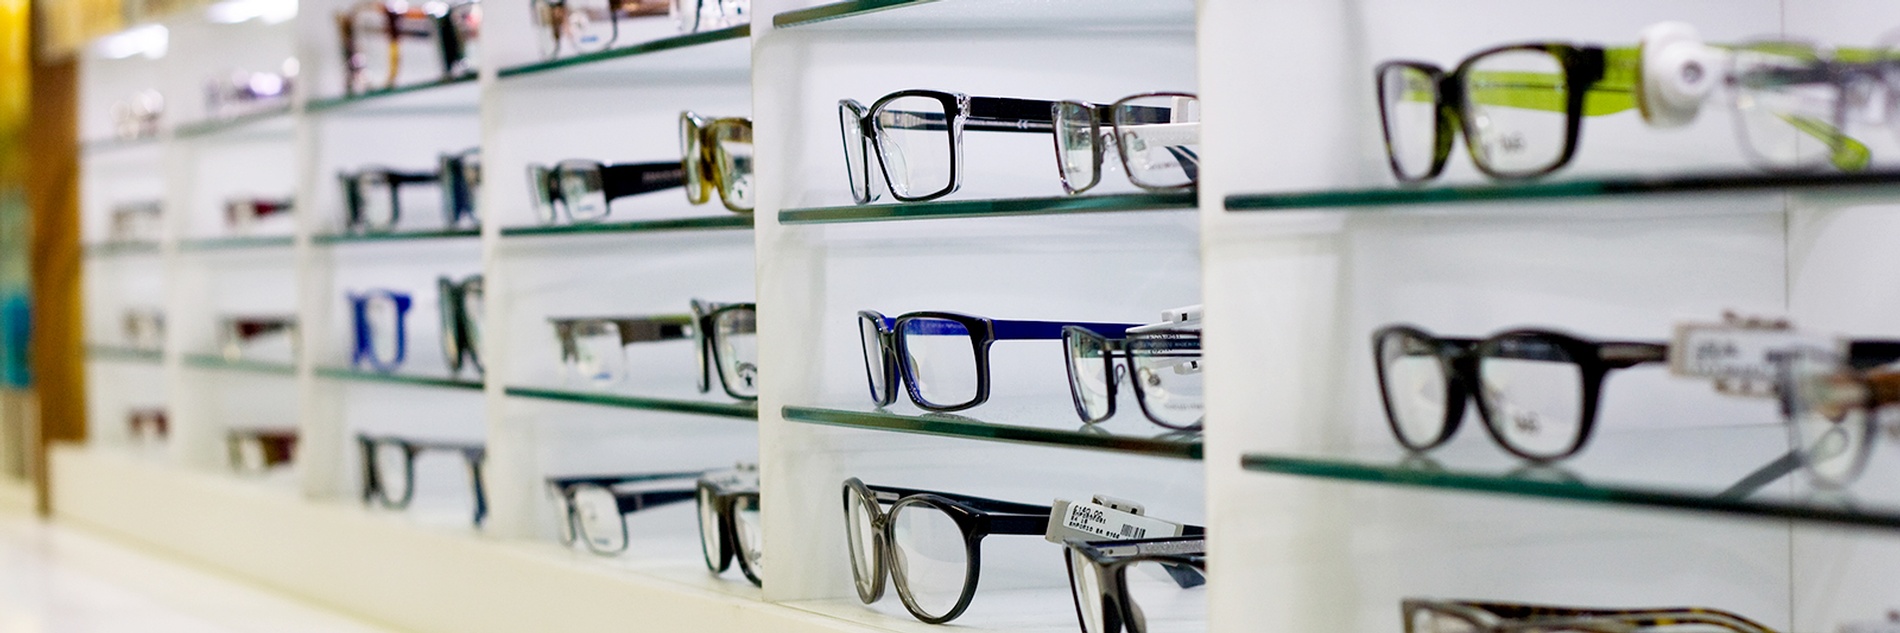 Blog by Penticton Optical - Licensed Opticians, Contact Lens Technicians in Penticton, BC